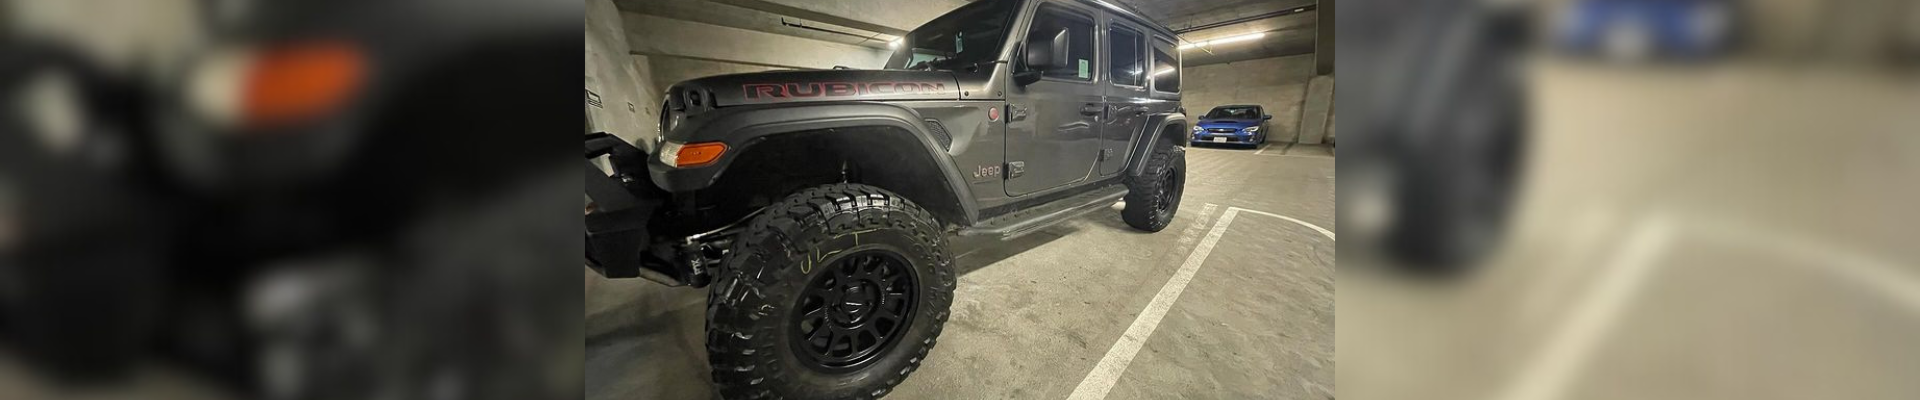 jeep-Wrangler-gallery-img-1.png